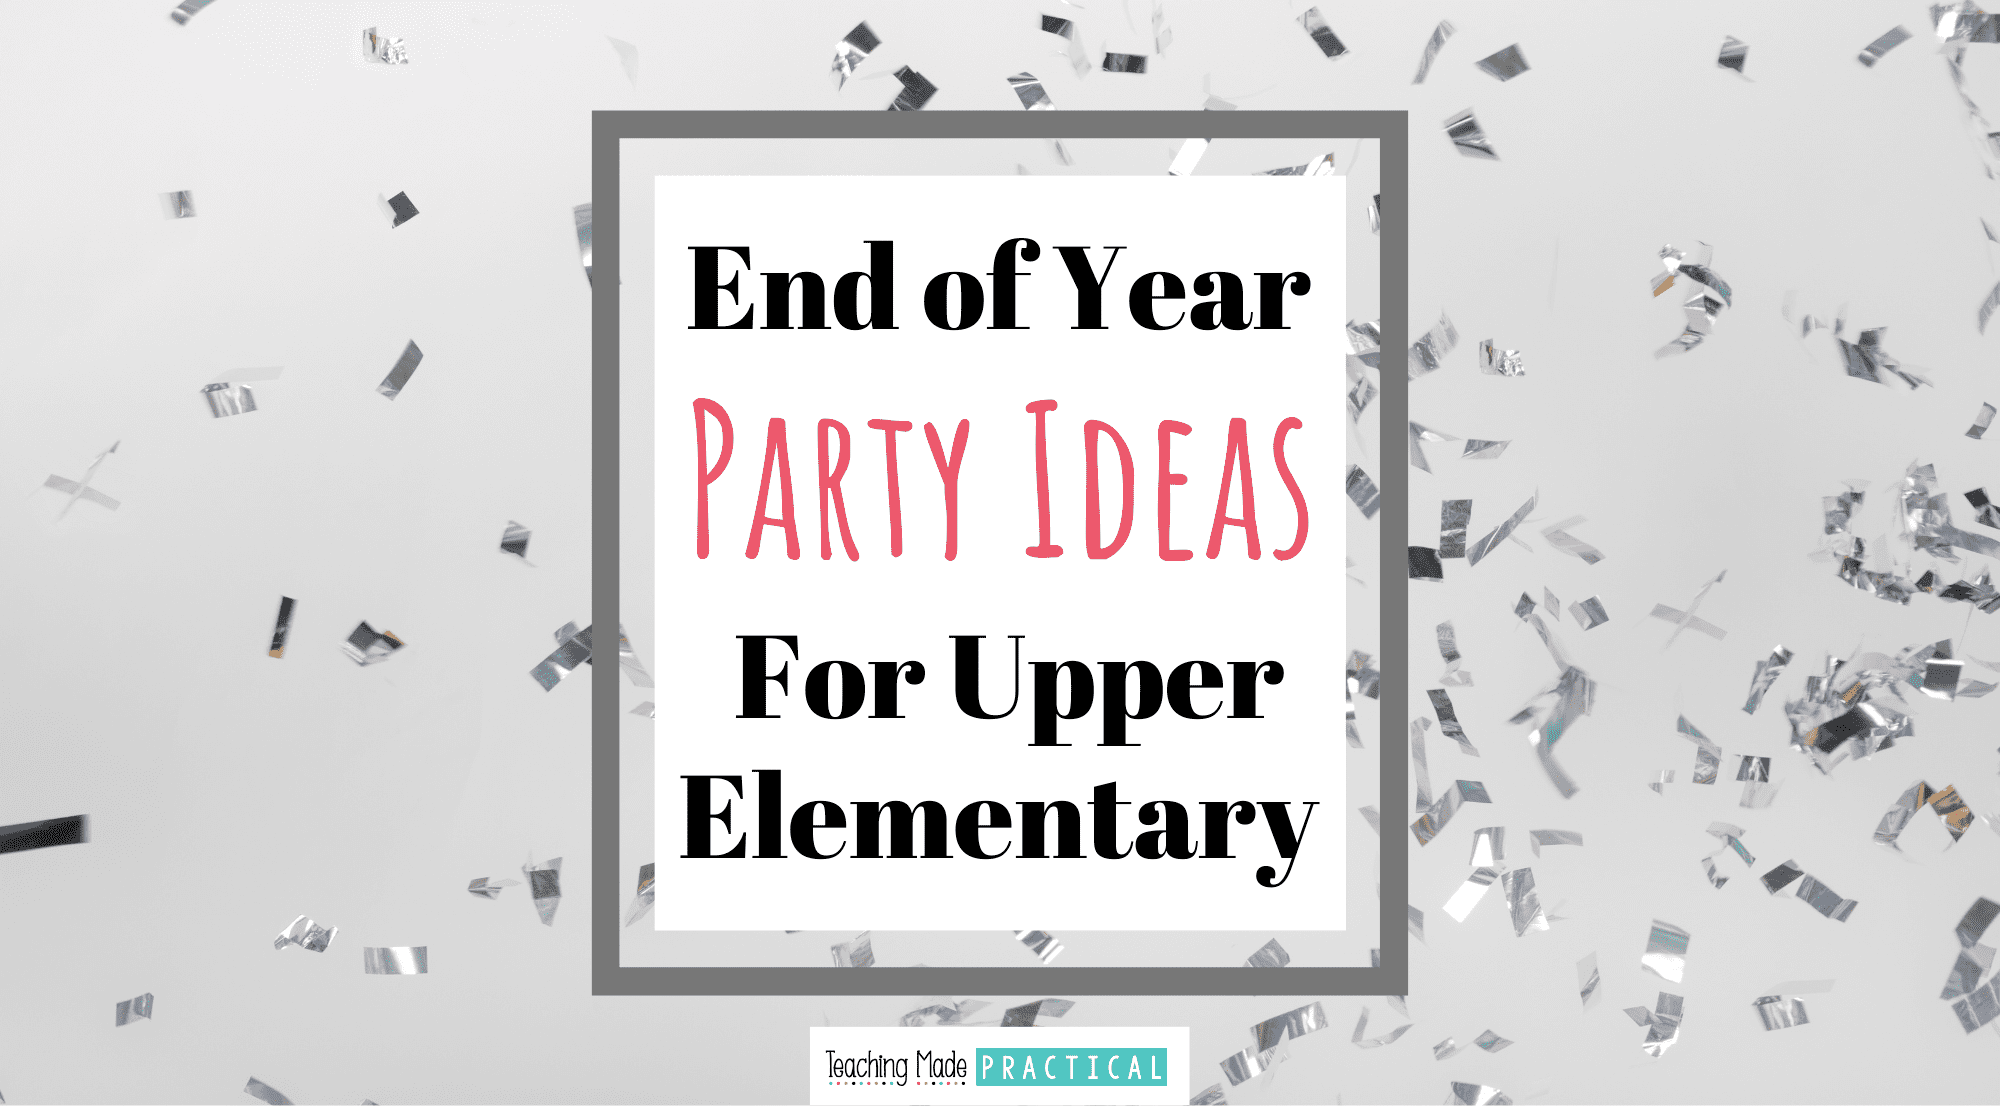 End of Year Party Ideas for upper elementary students.